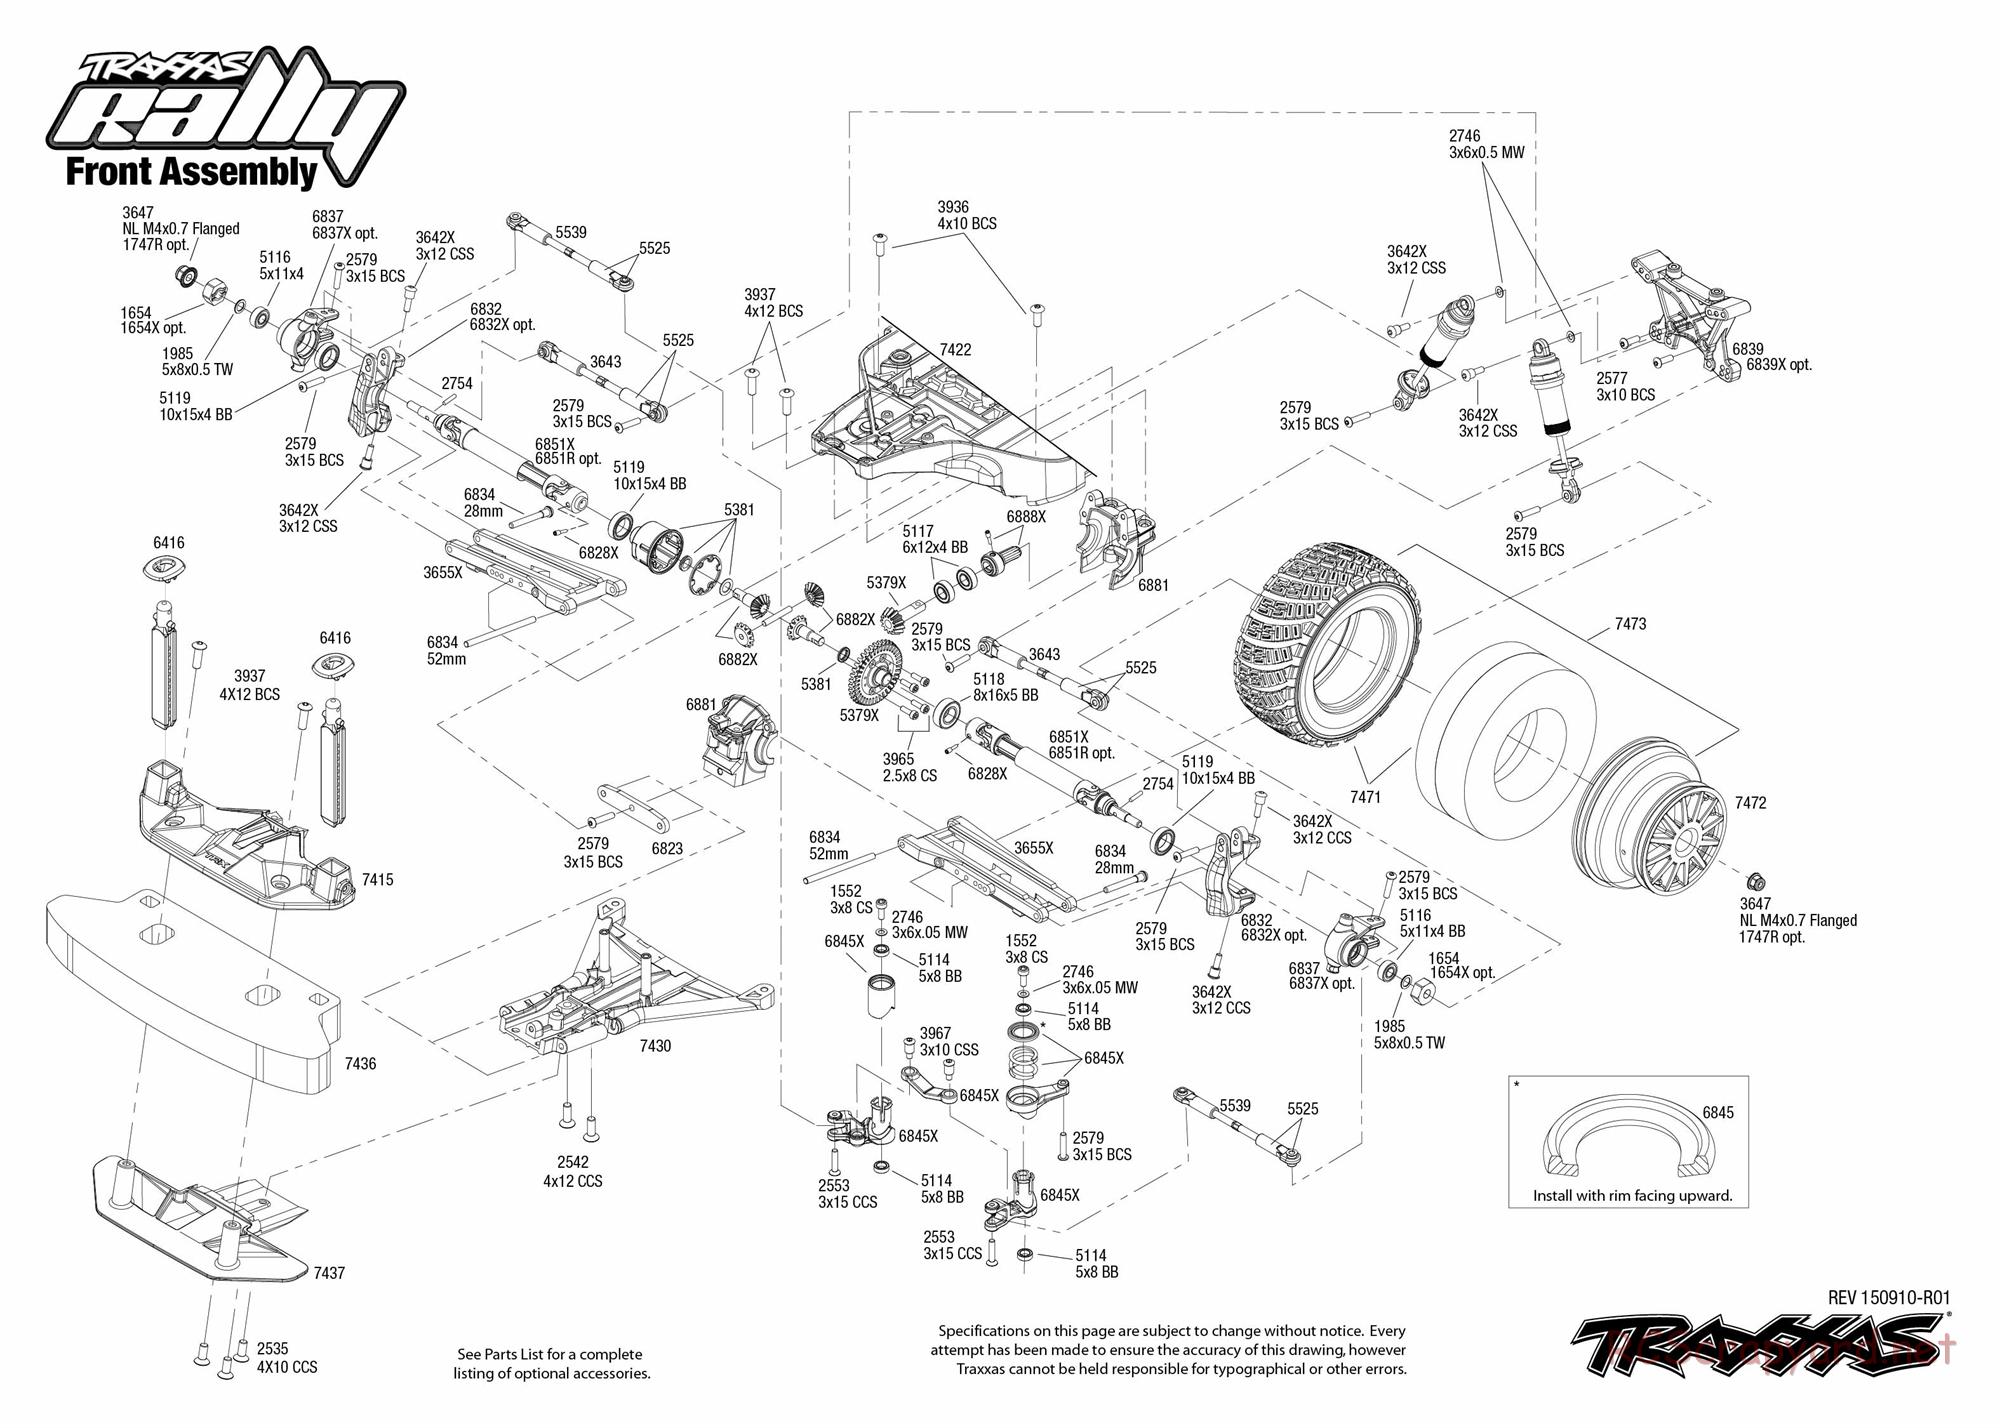 Traxxas - Rally (2015) - Exploded Views - Page 3